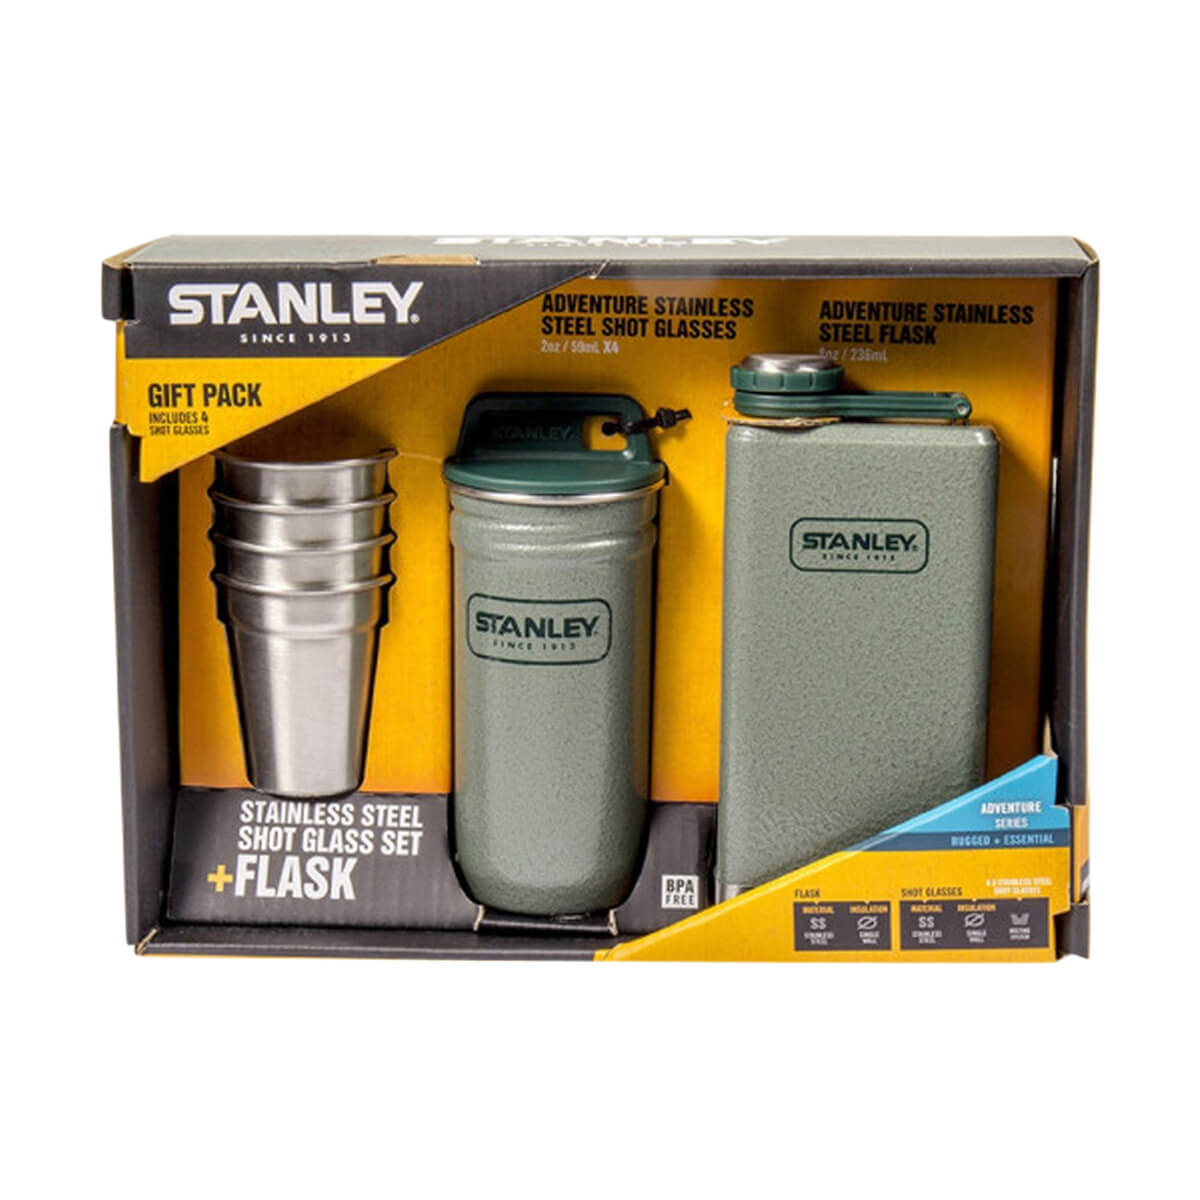 Adventure Stainless Steel Shots + 8oz. Flask Gift Set